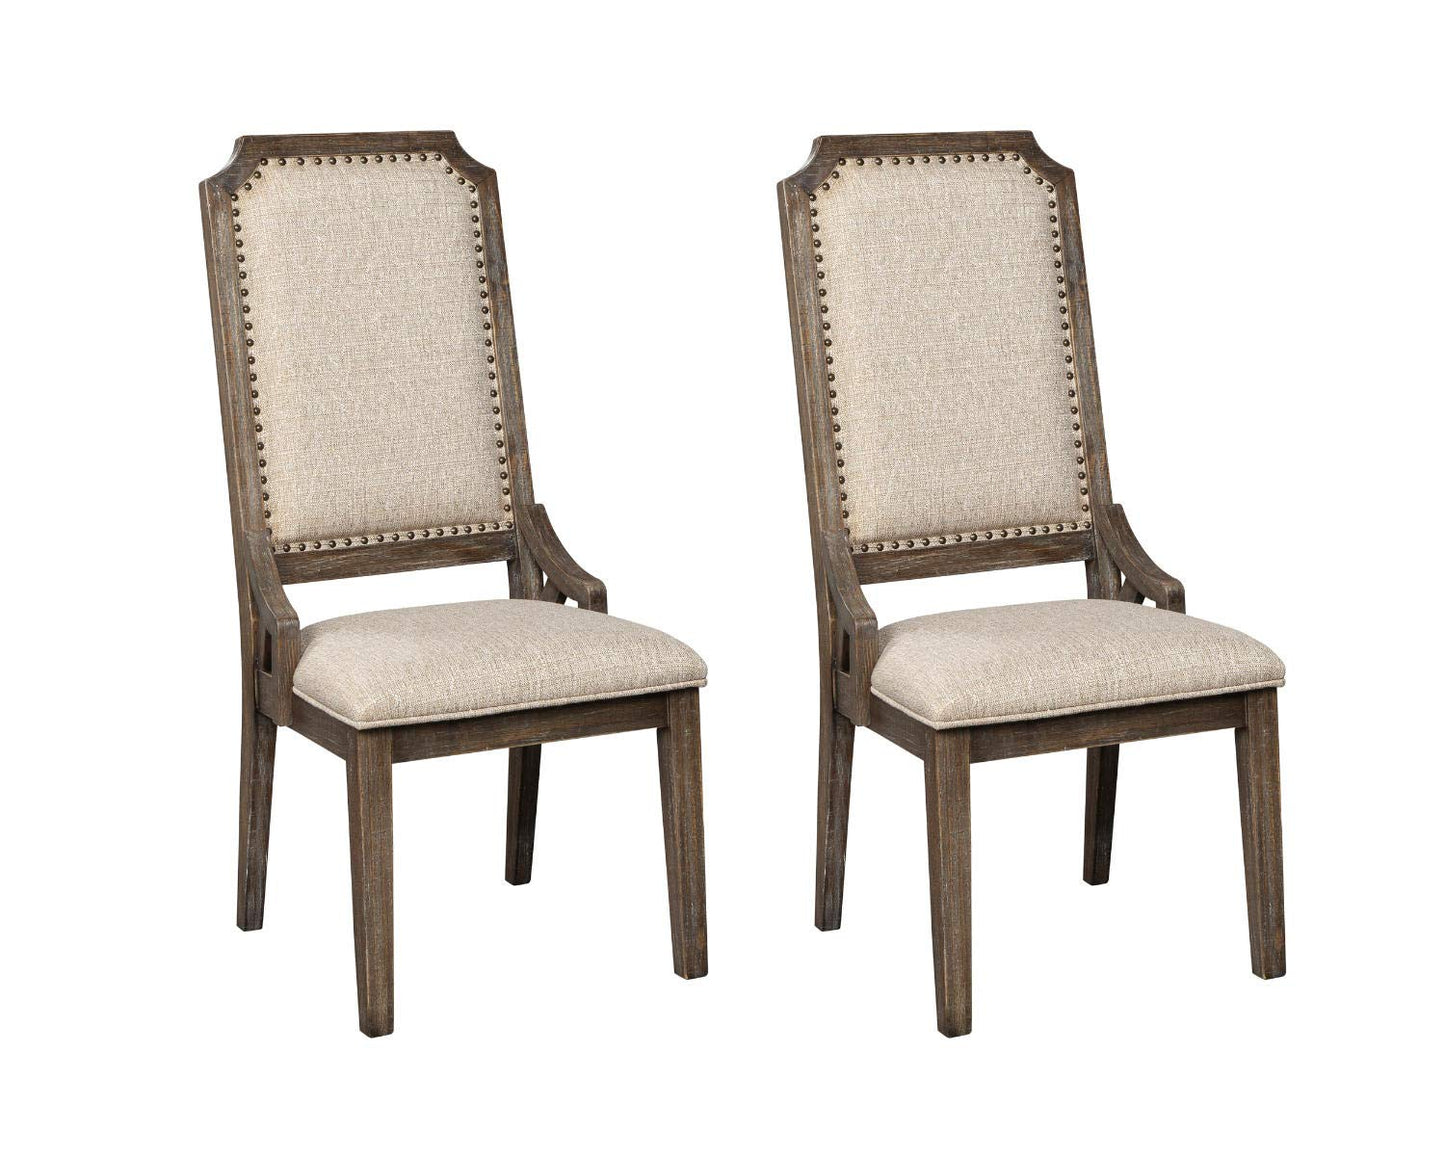 Signature Design by Ashley Wyndahl Rustic Modern Upholstered Dining Chair, 2 Count, Distressed Brown